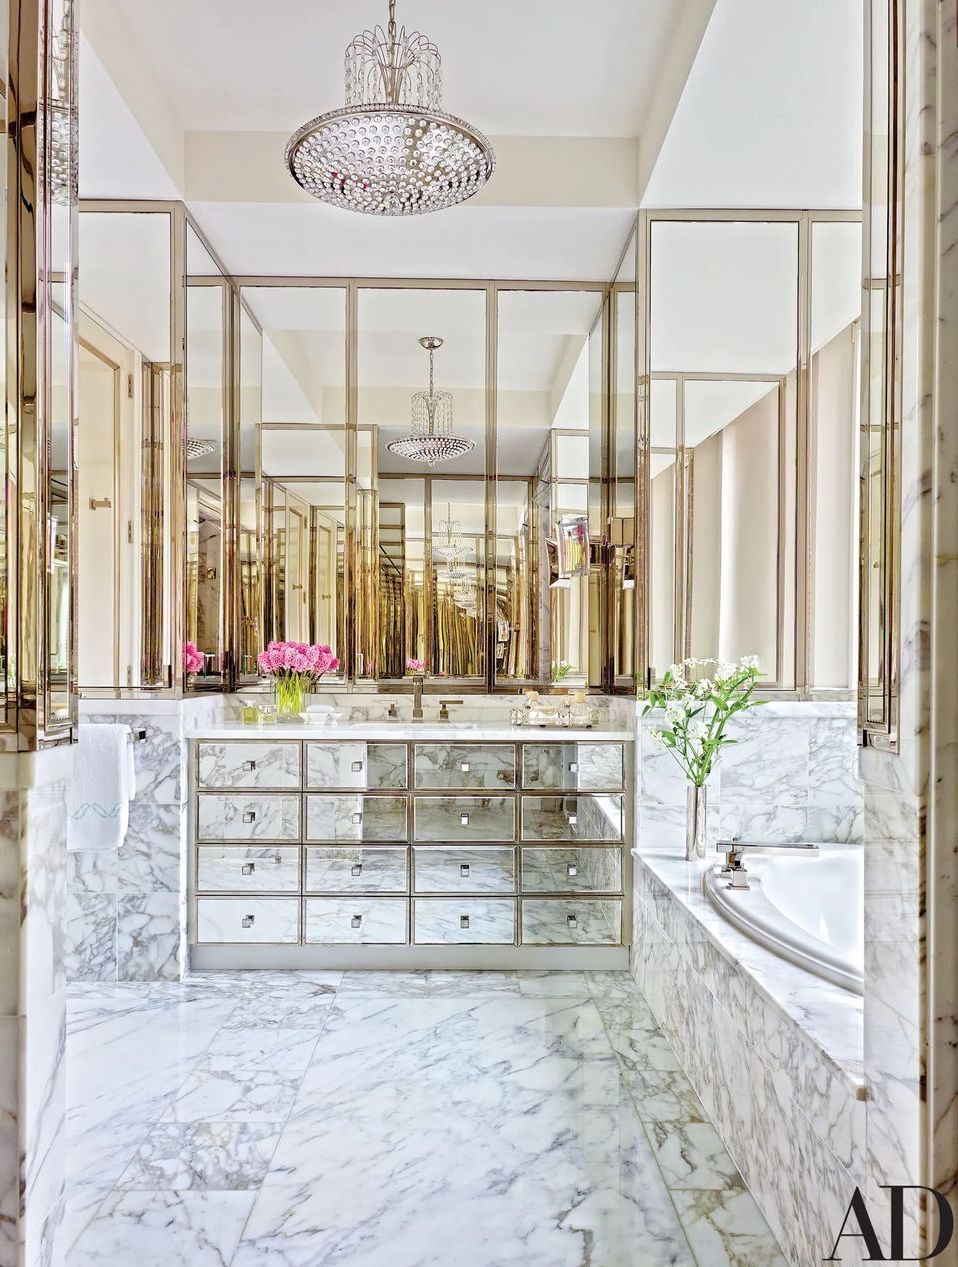 10 Best Glam Bathroom Decor Ideas You'll Swoon Over